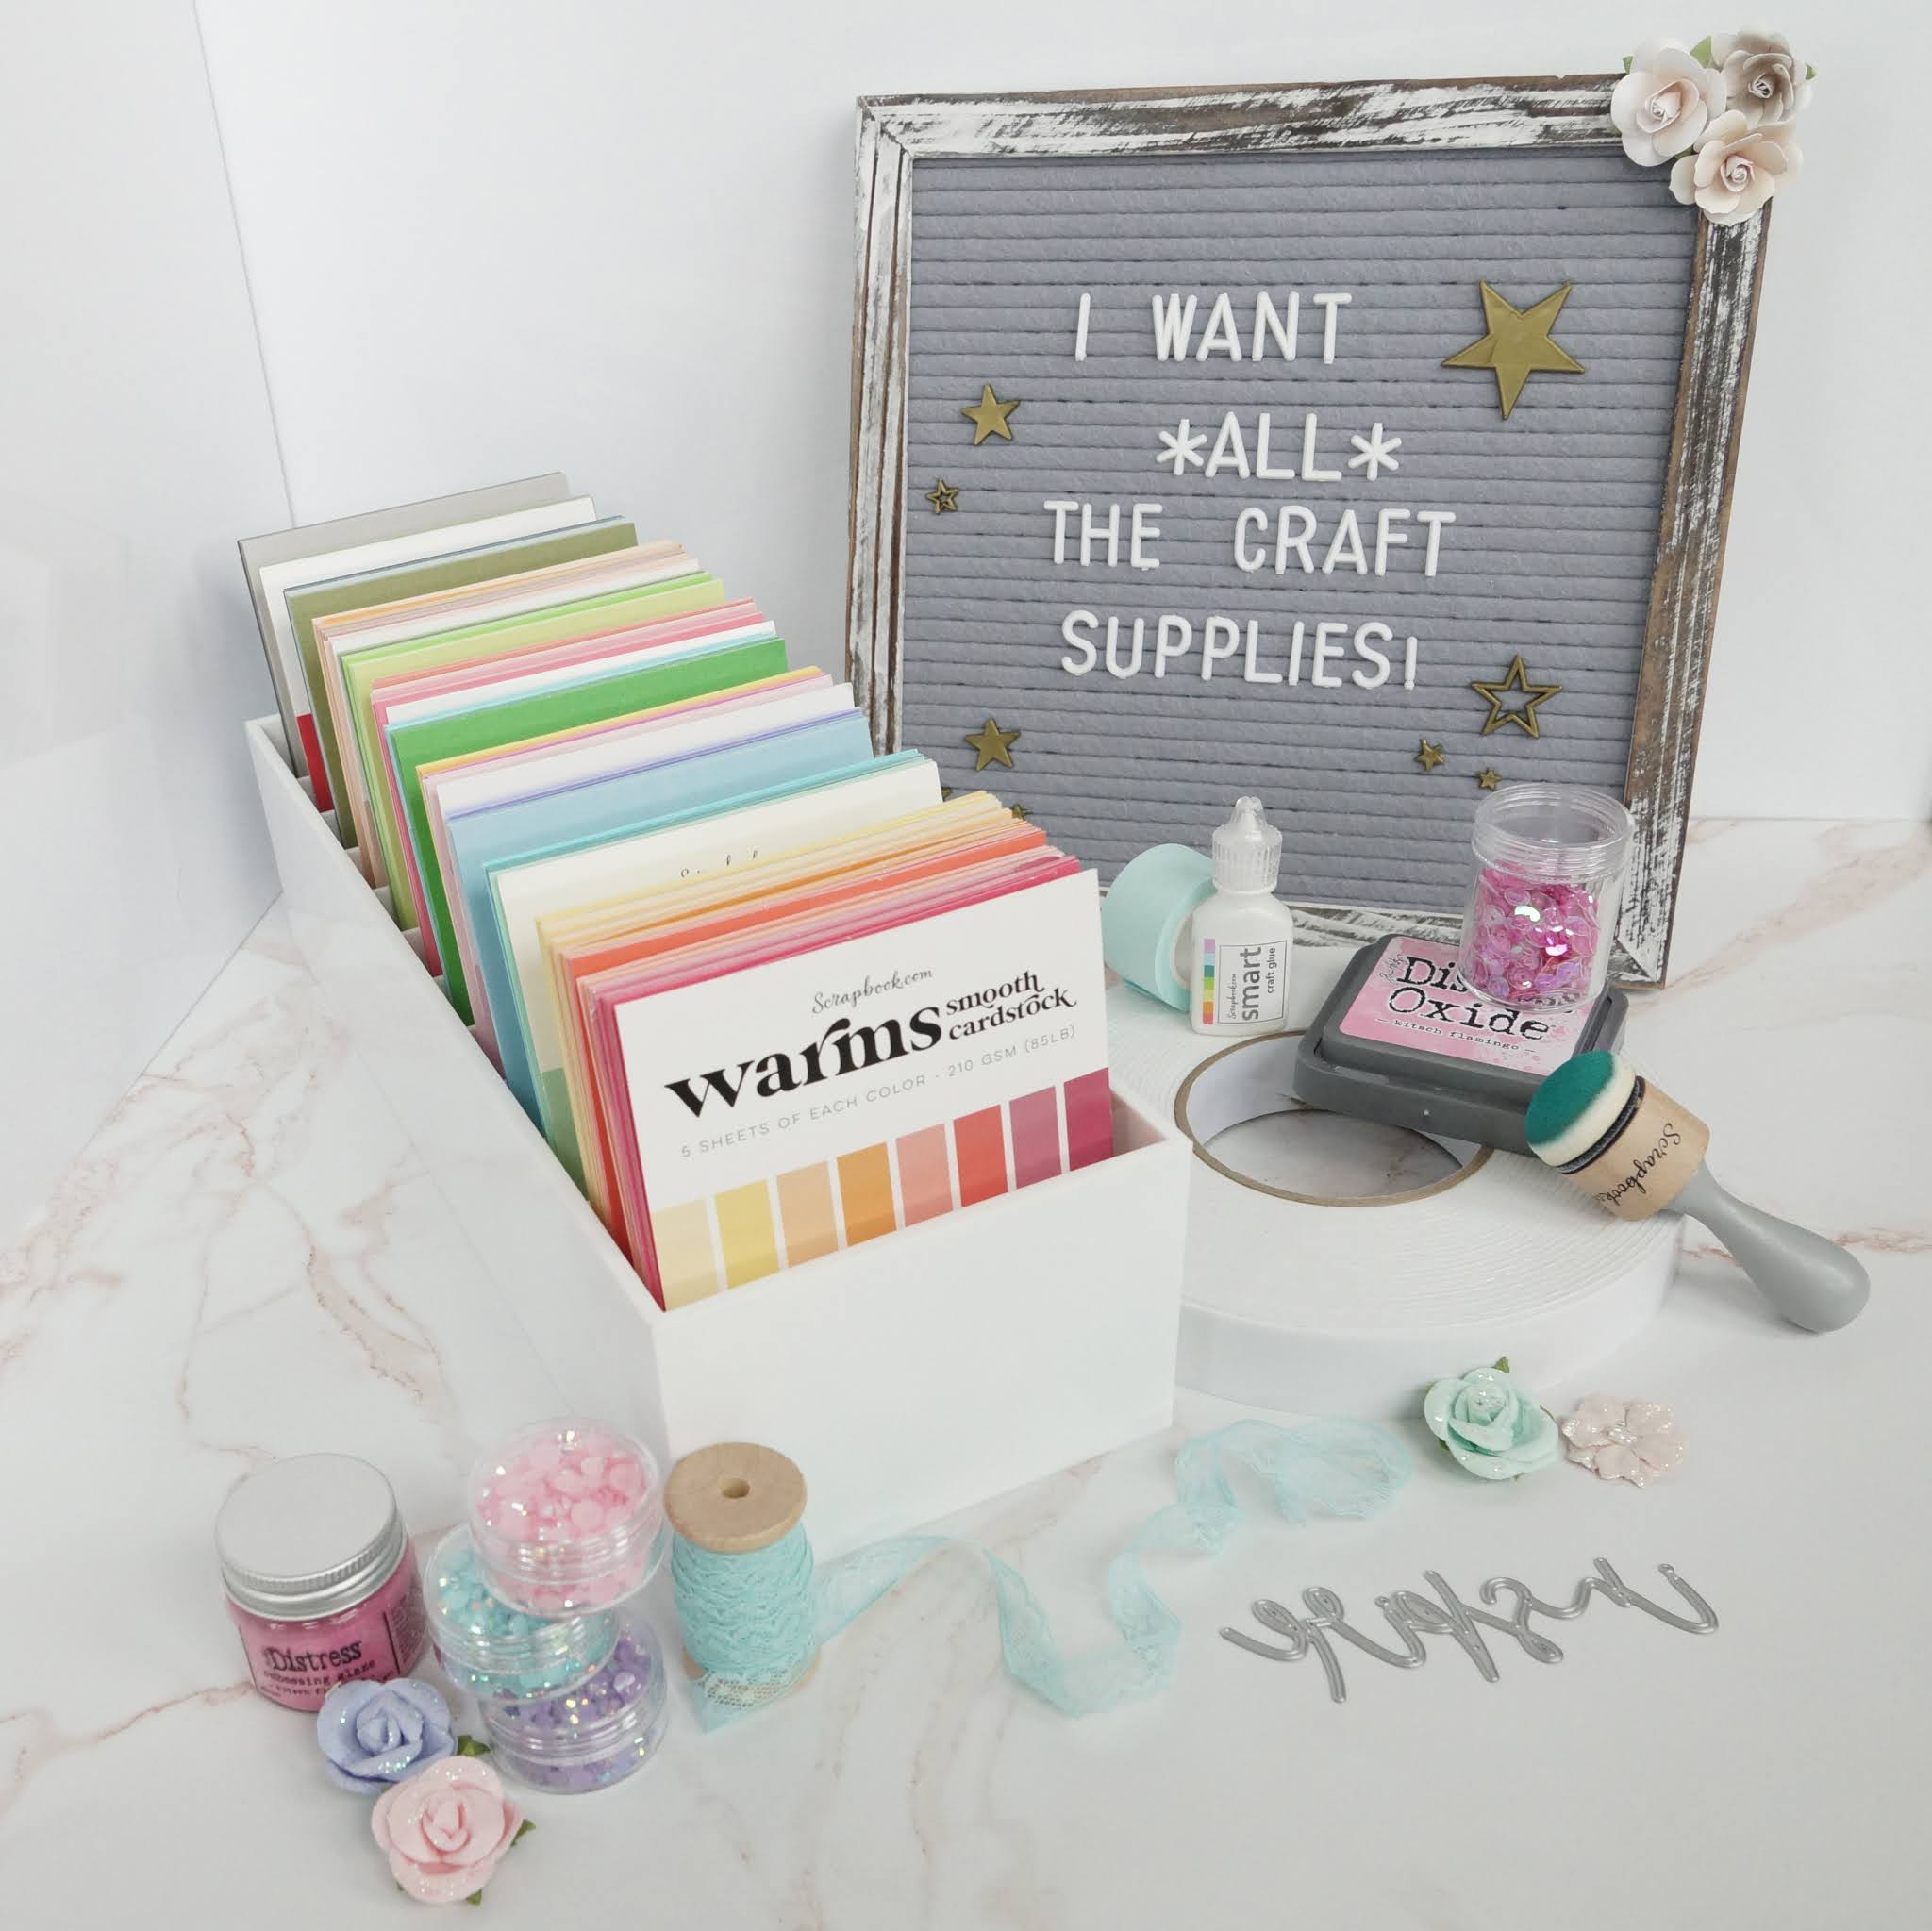 How to Organize Your Scrapbooking Supplies - Love Paper Crafts